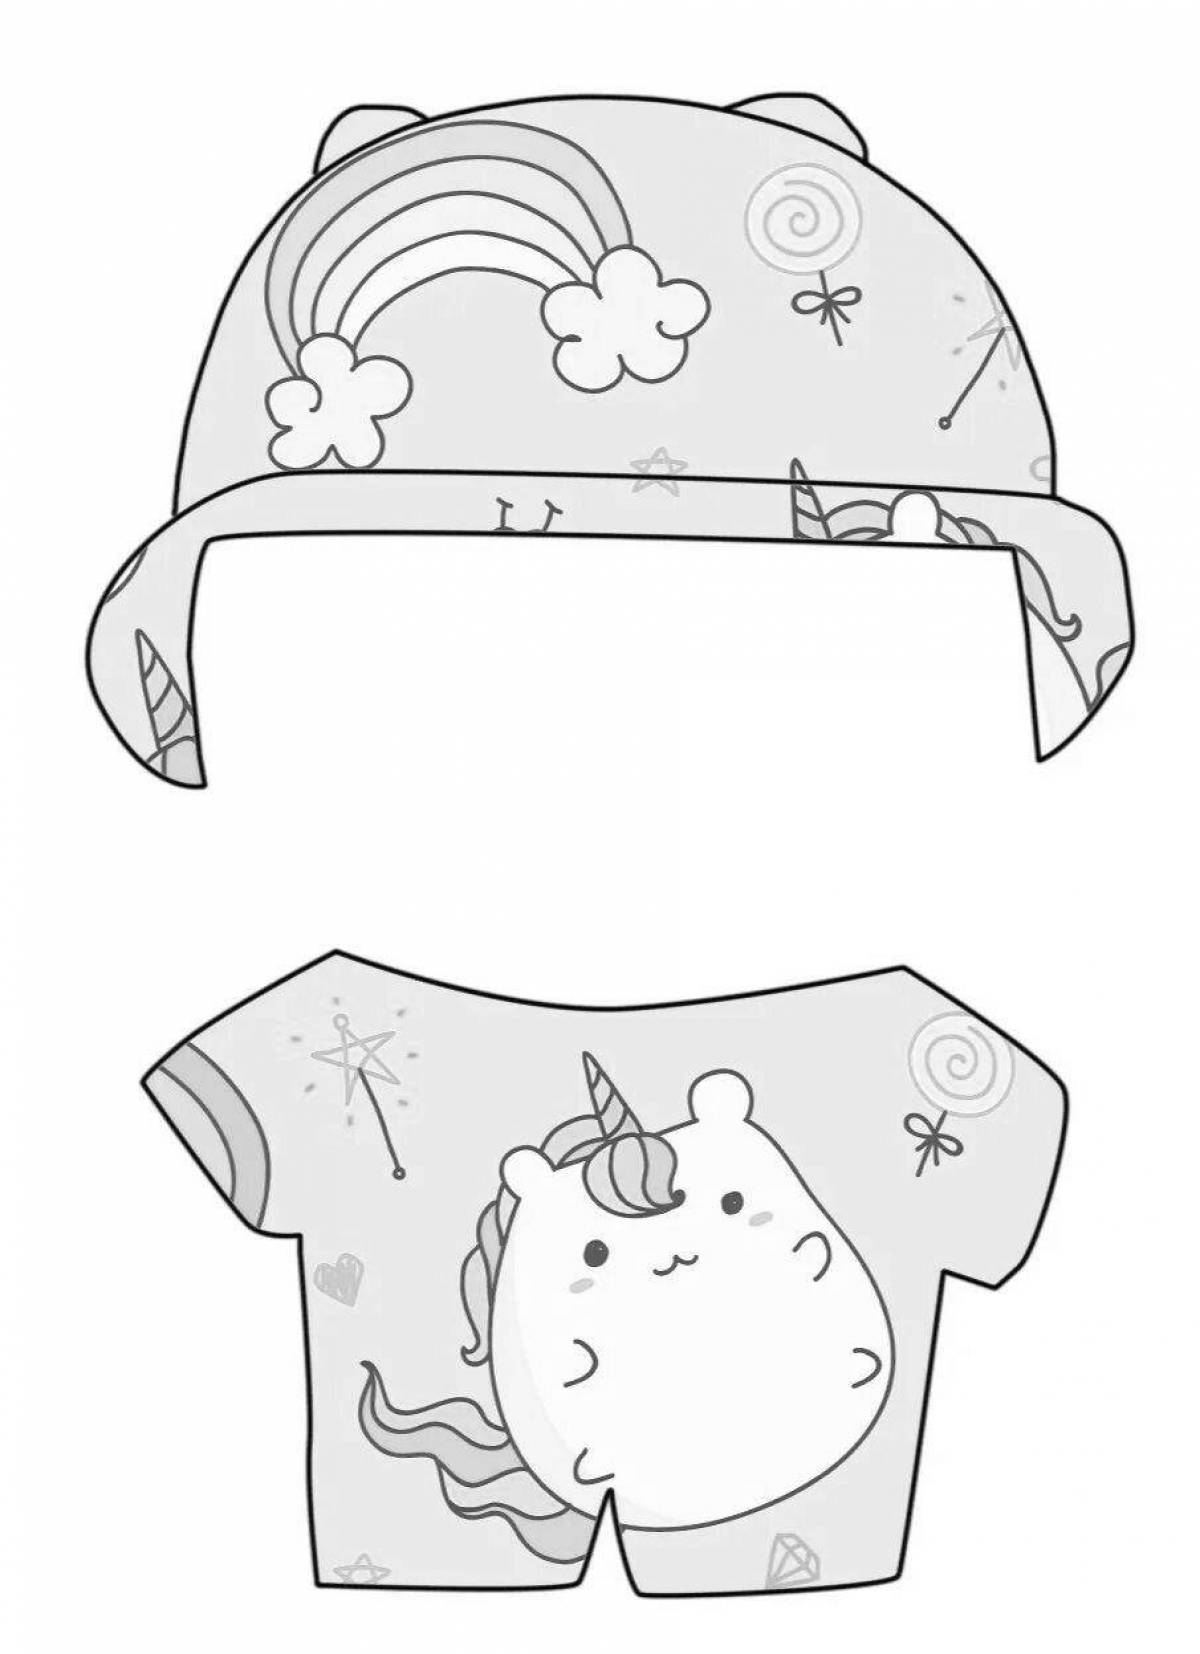 Coloring page cute lalafanfan paper duck clothes